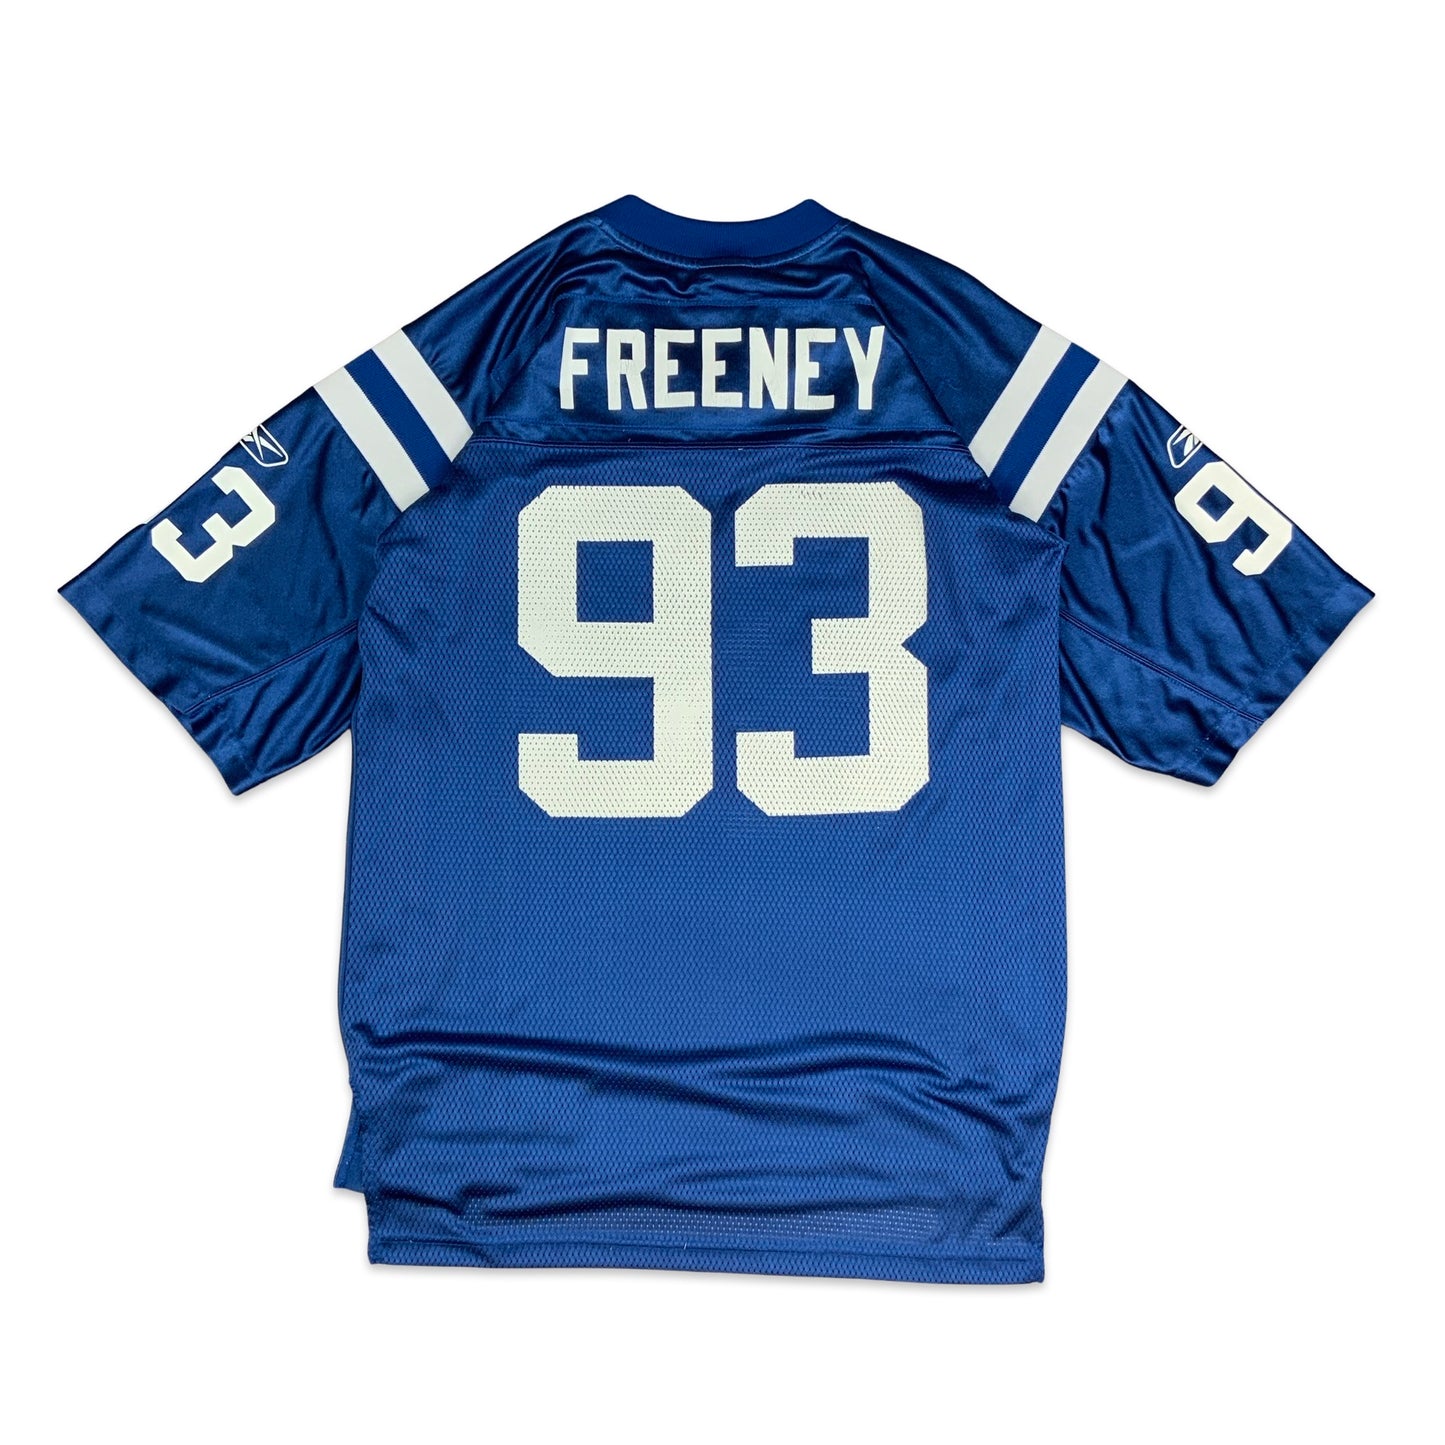 Indianapolis Colts Dwight Freeney Blue Jersey M L